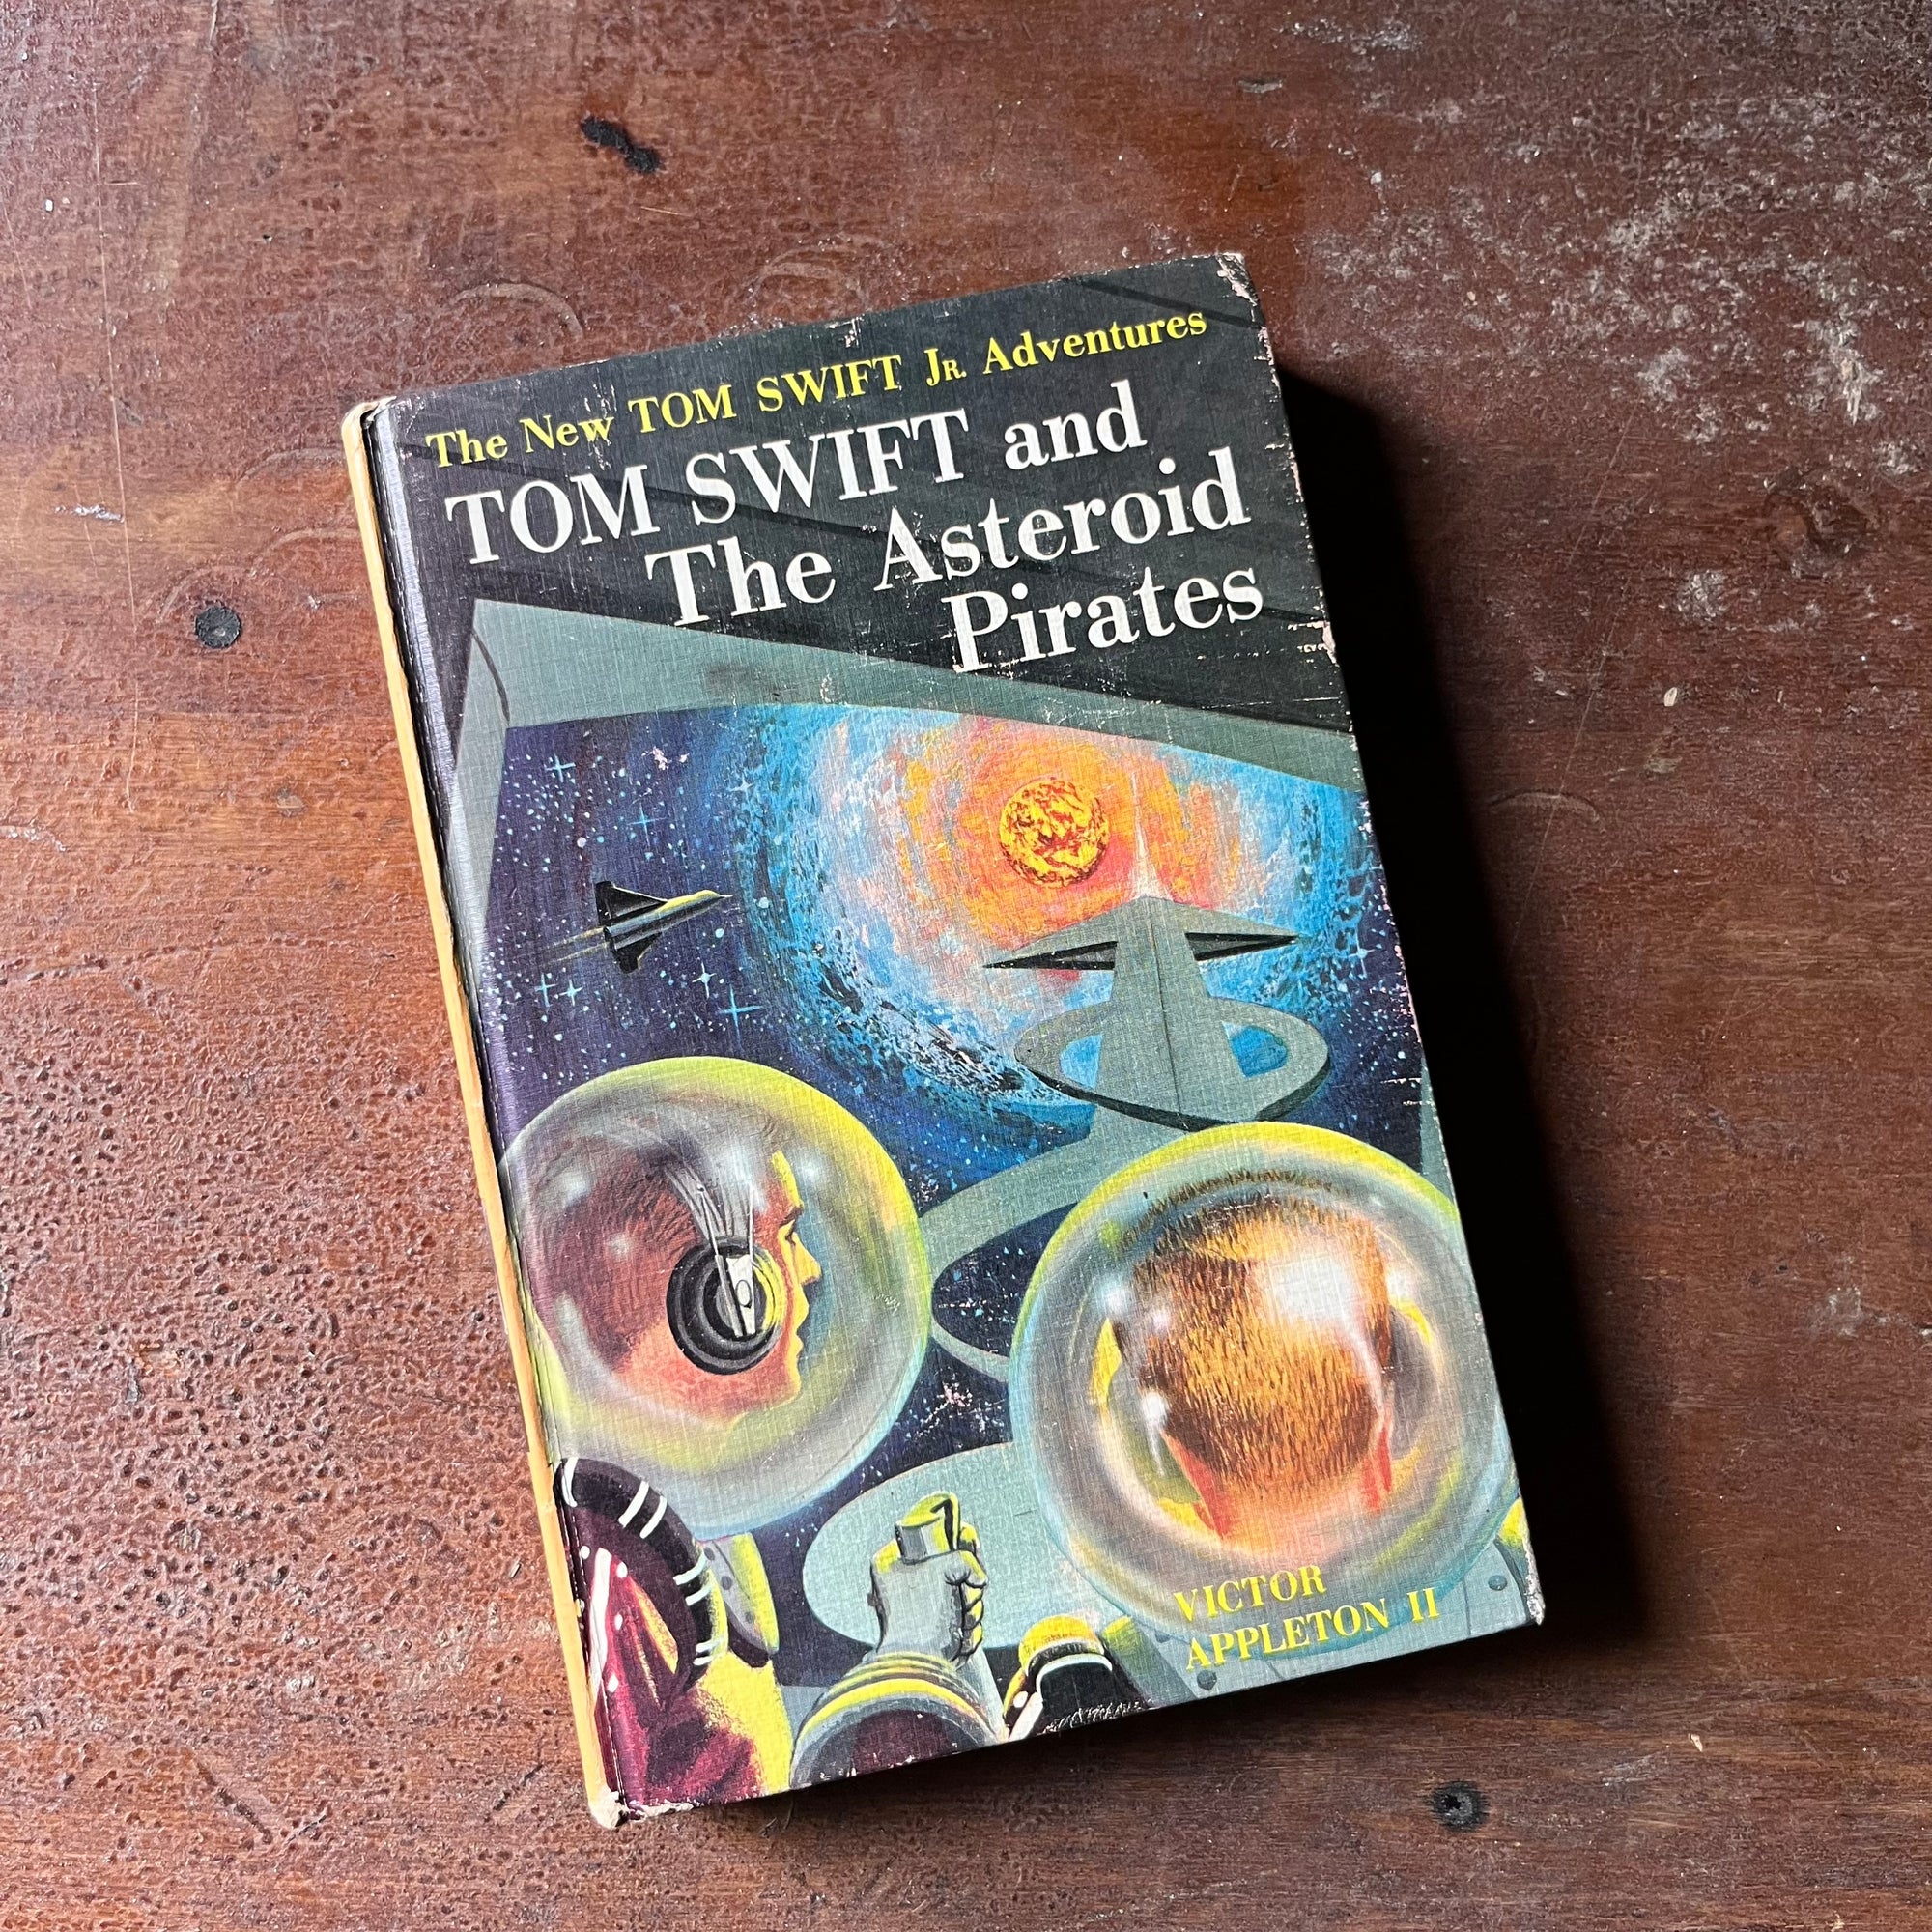 vintage children's adventure book, homeschool library, vintage boy adventure book, The New Tom Swift Jr. Adventures Book - Tom Swift and The Asteroid Pirates written by Victor Appleton II with illustrations by Charles Brey - view of the front cover